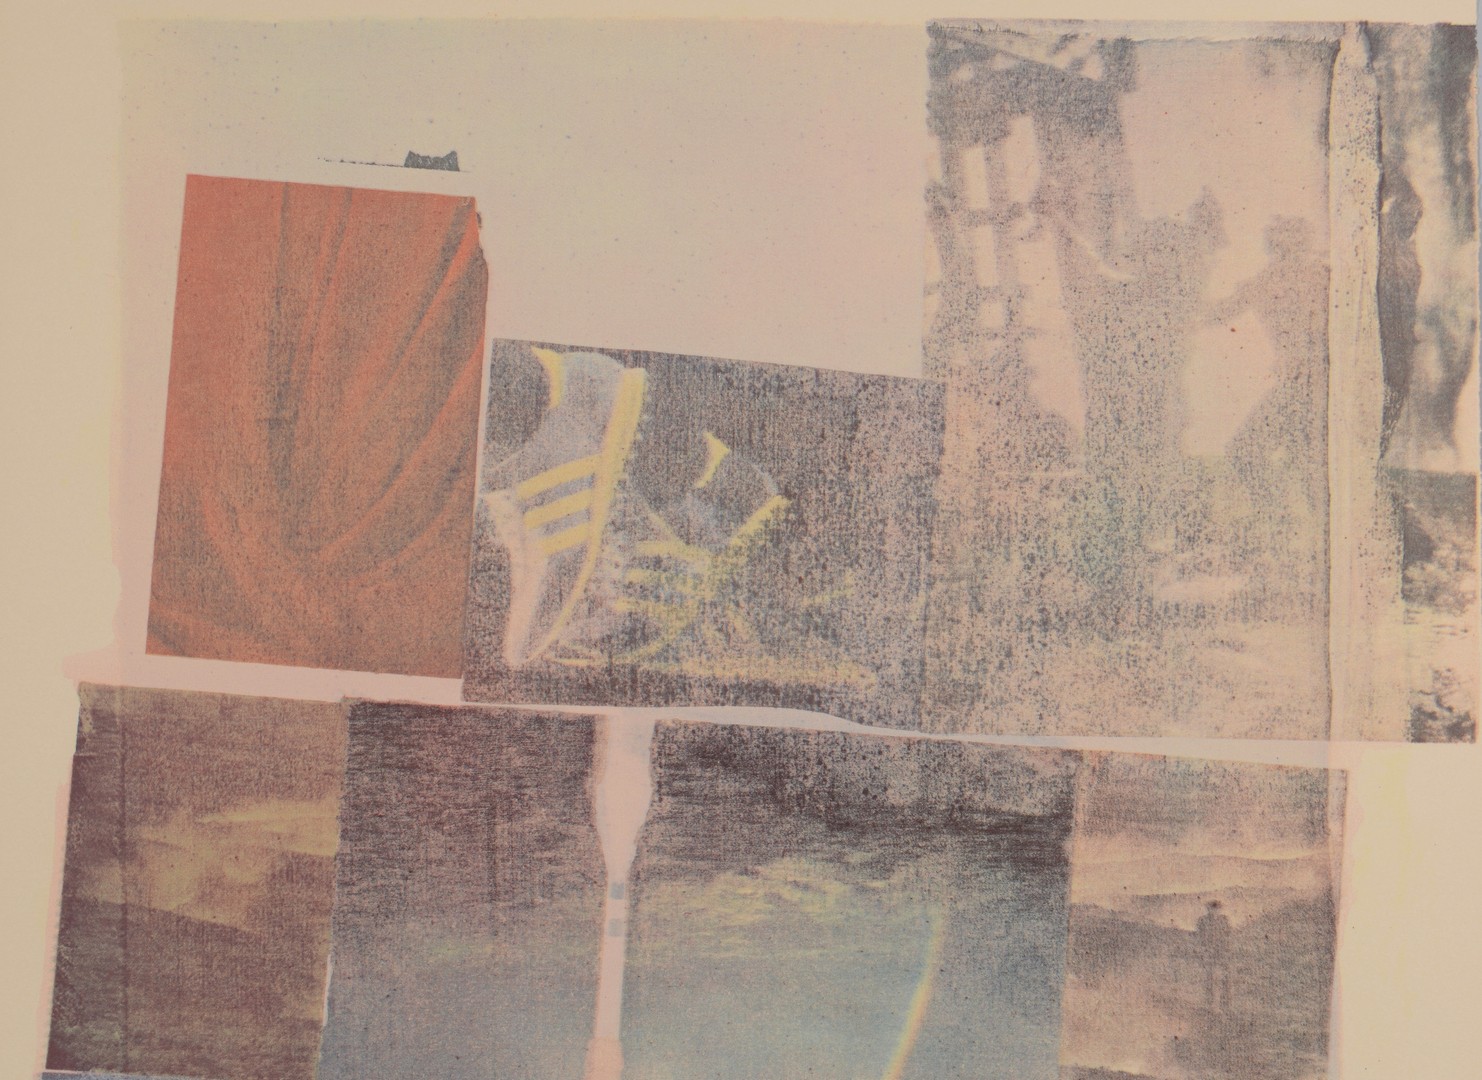 Lot 317: Rauschenberg Signed Litho, People Have Enough Trouble Without Being Intimidated by an Artichoke